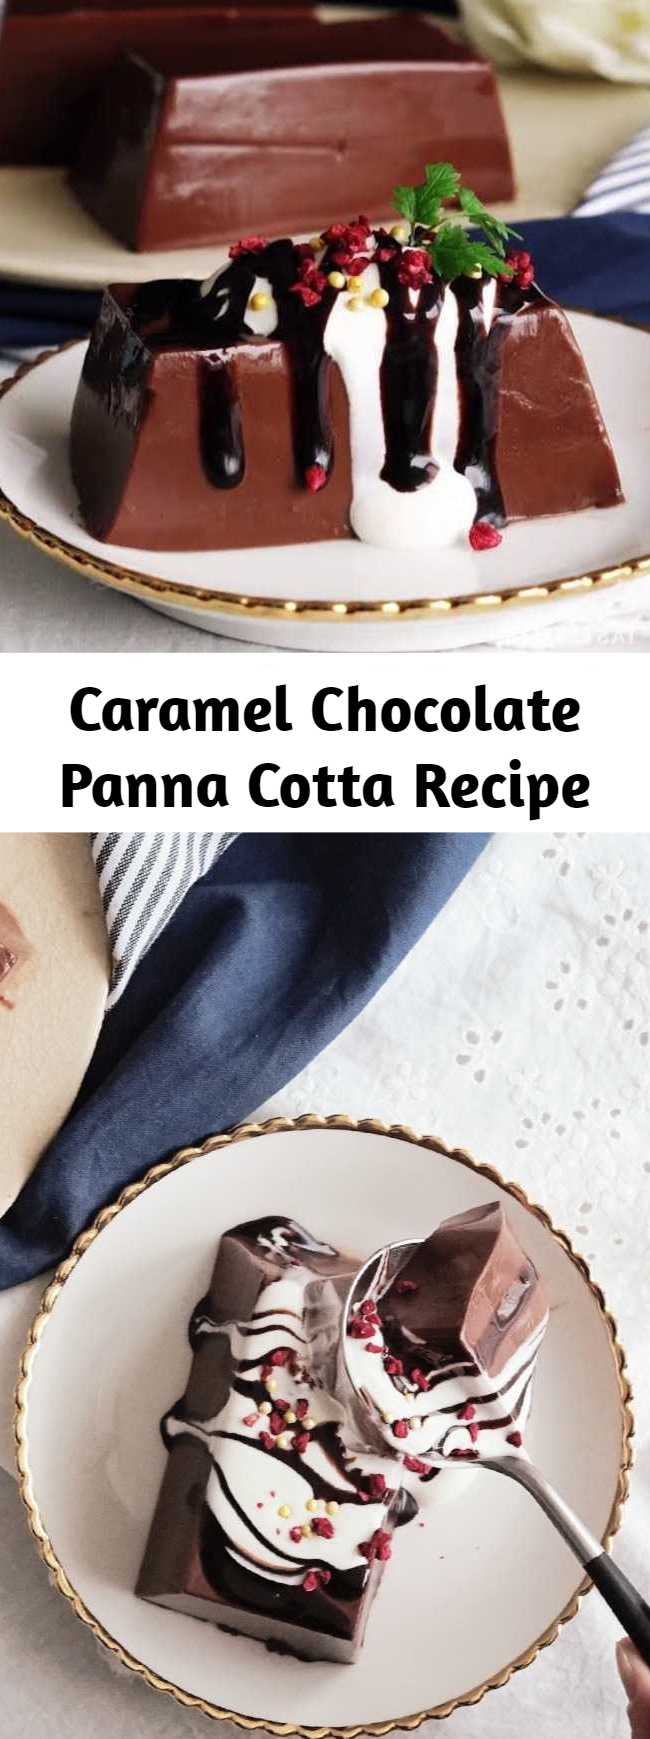 Caramel Chocolate Panna Cotta Recipe - Just when you thought normal panna cotta couldn't taste better, we came up with this.